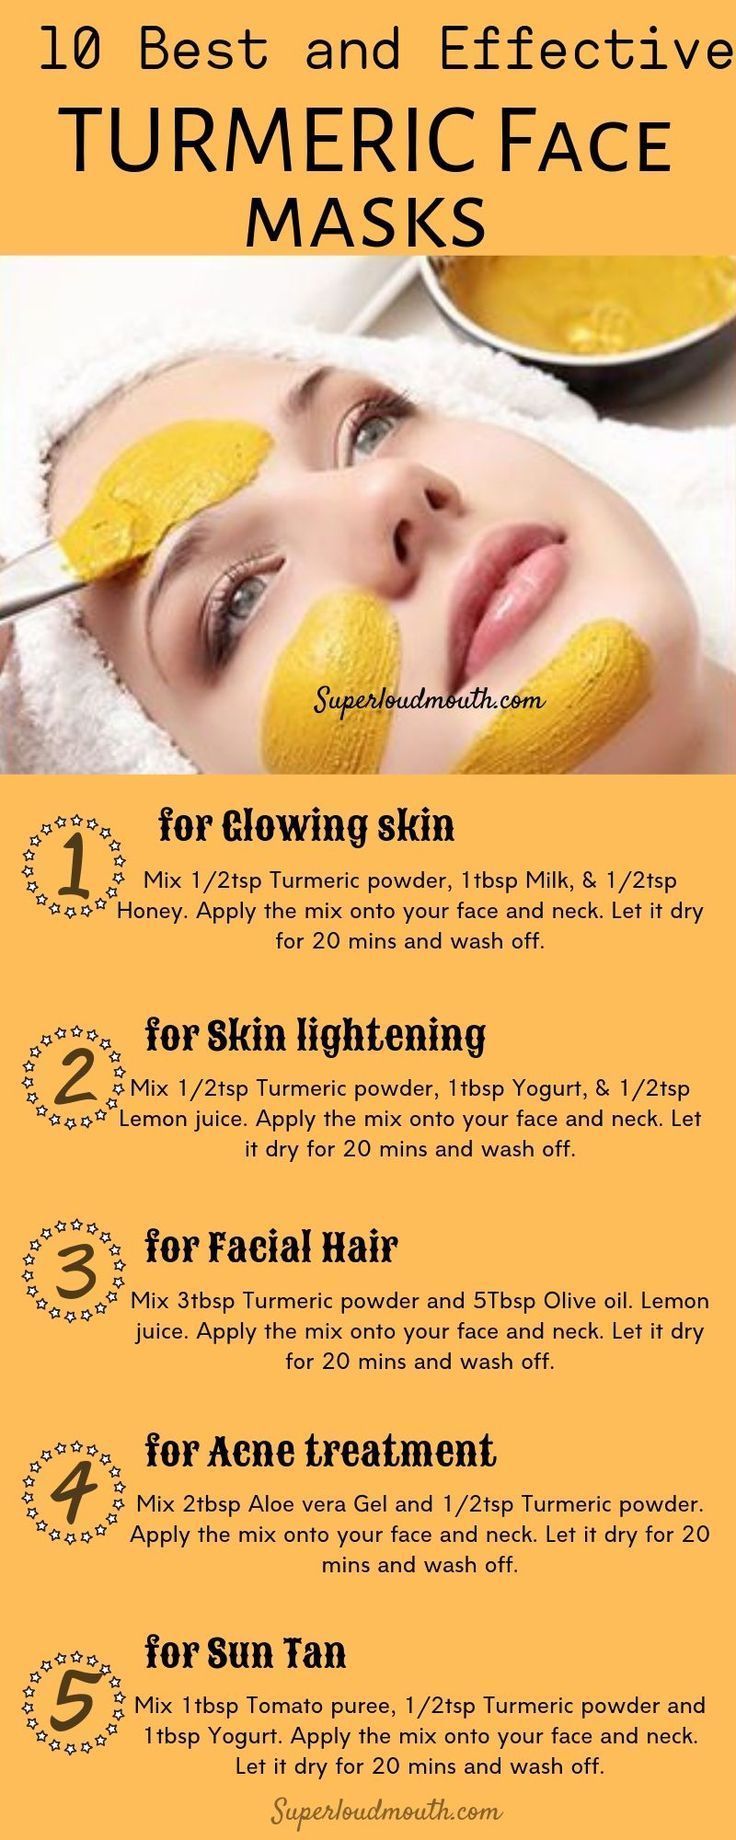 How I Improved My Skin Complexion with TURMERIC FACE MASK In One Day - How I Improved My Skin Complexion with TURMERIC FACE MASK In One Day -   15 diy Face Mask for pimples ideas